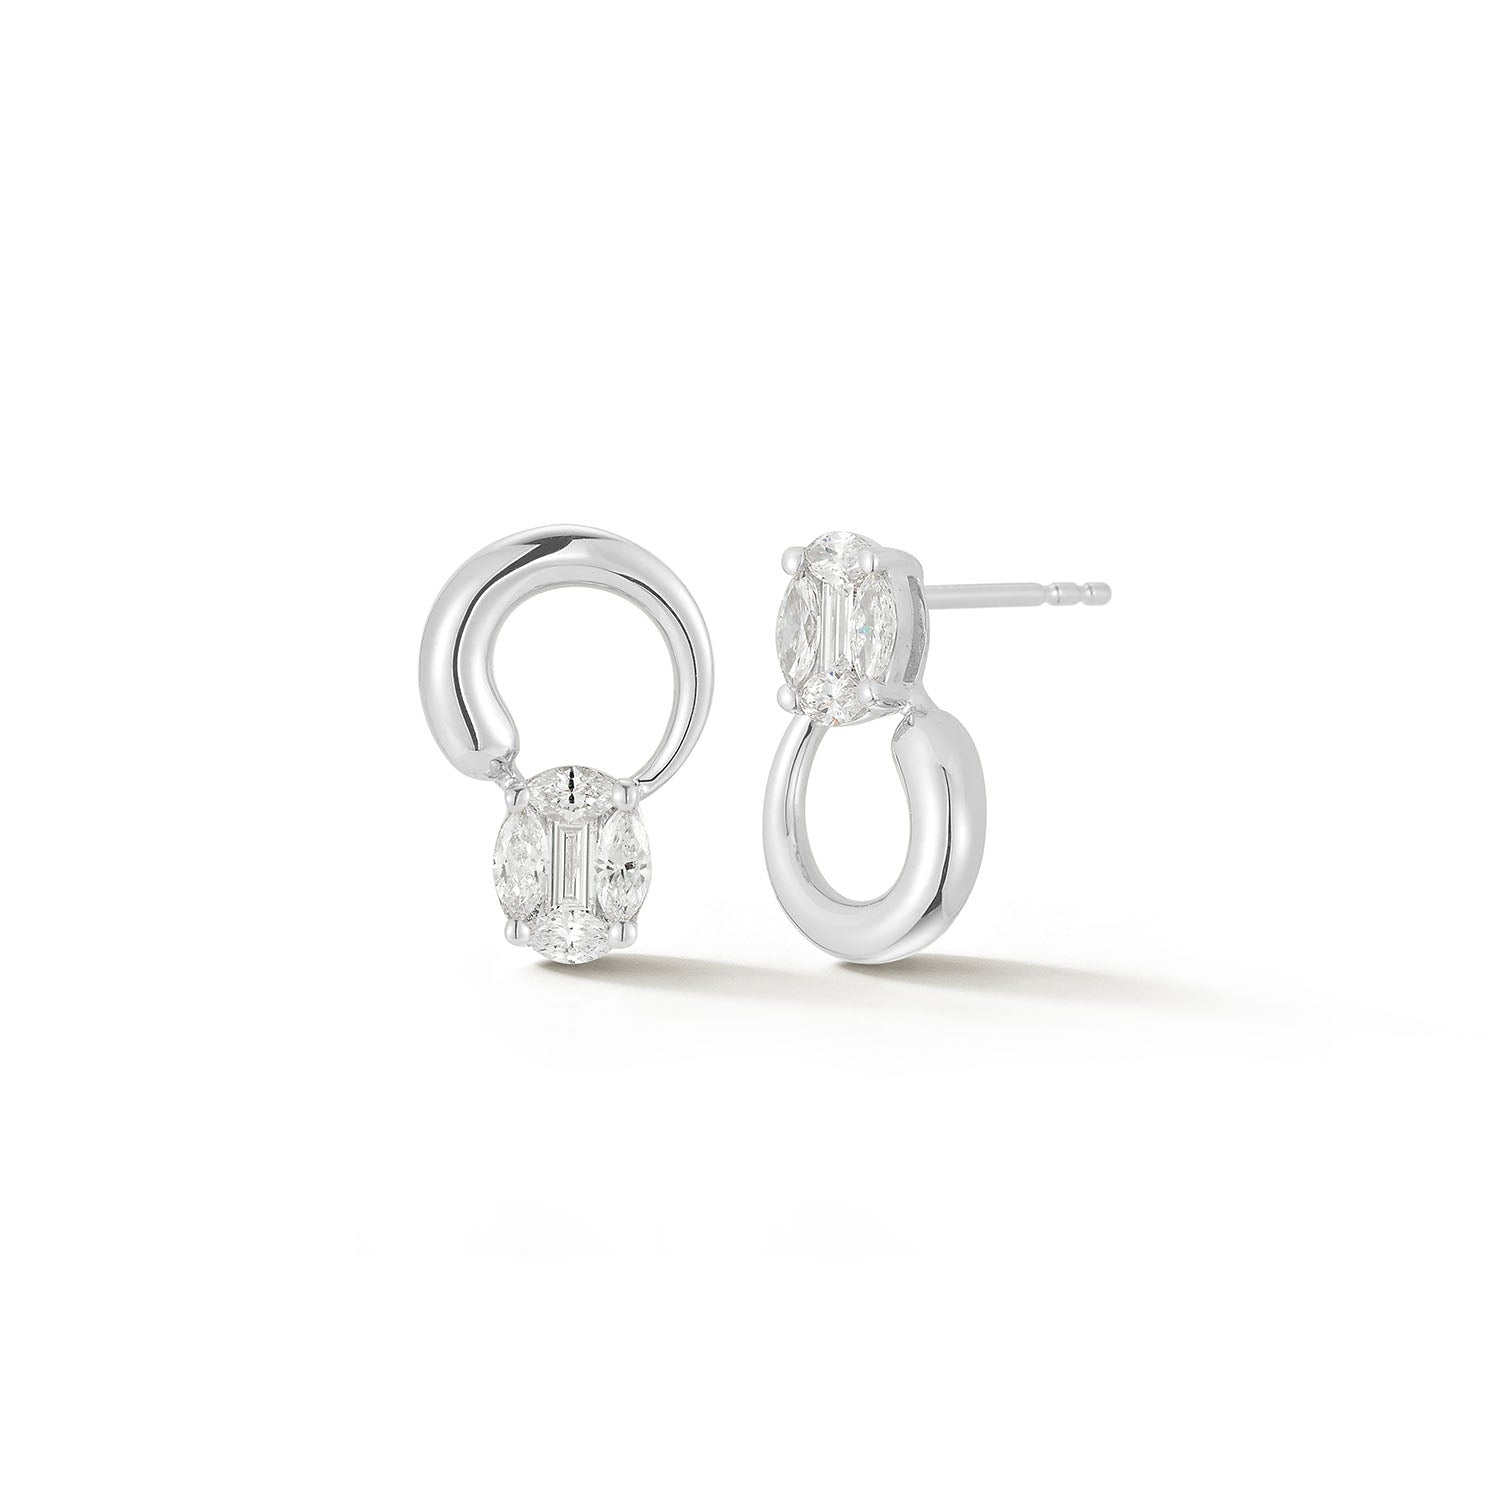 The Iris Illusion Stud Earrings in 14k white gold